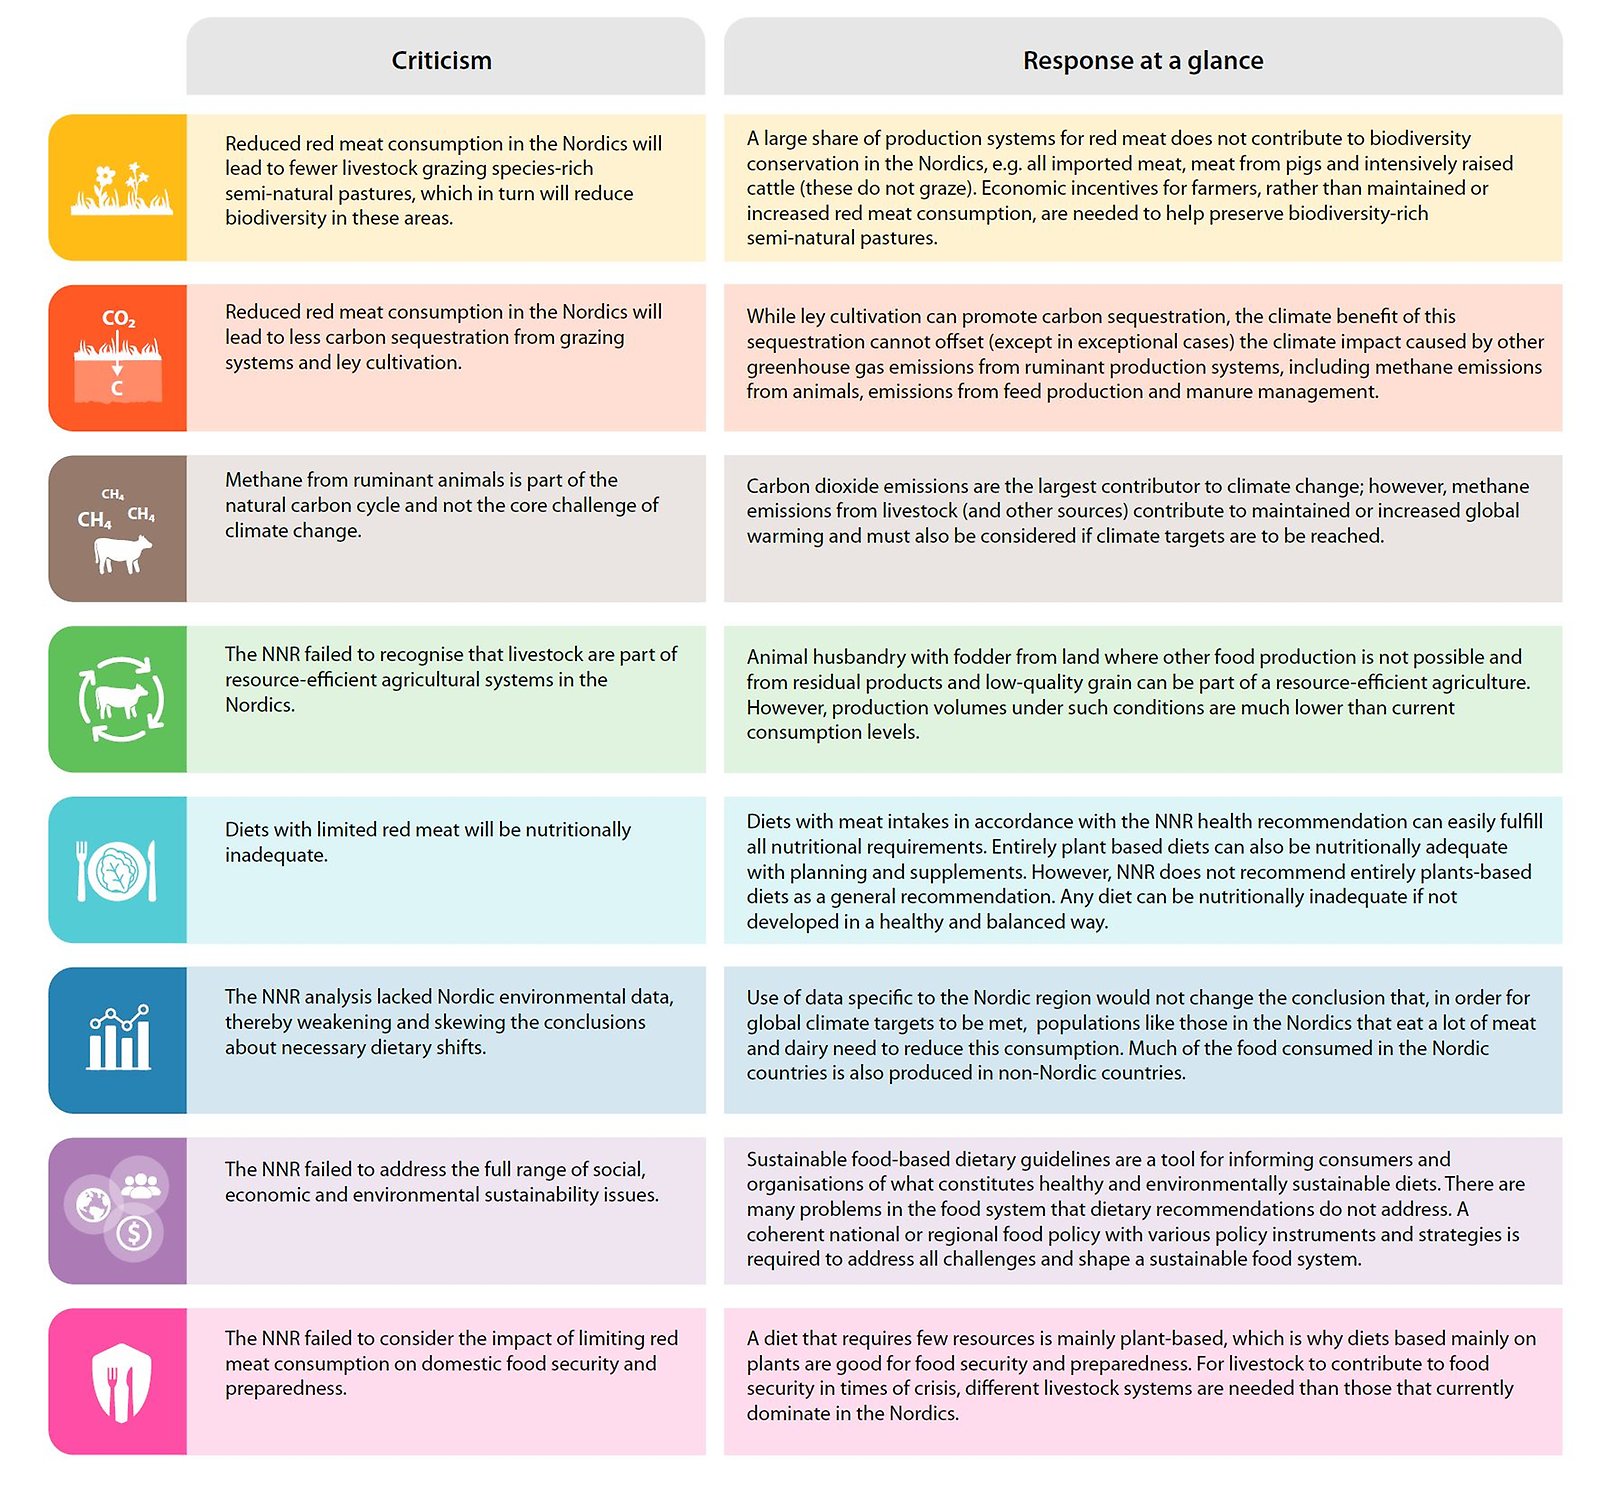 The infographic summarises the eight common stakeholder criticisms that are explored in the report.